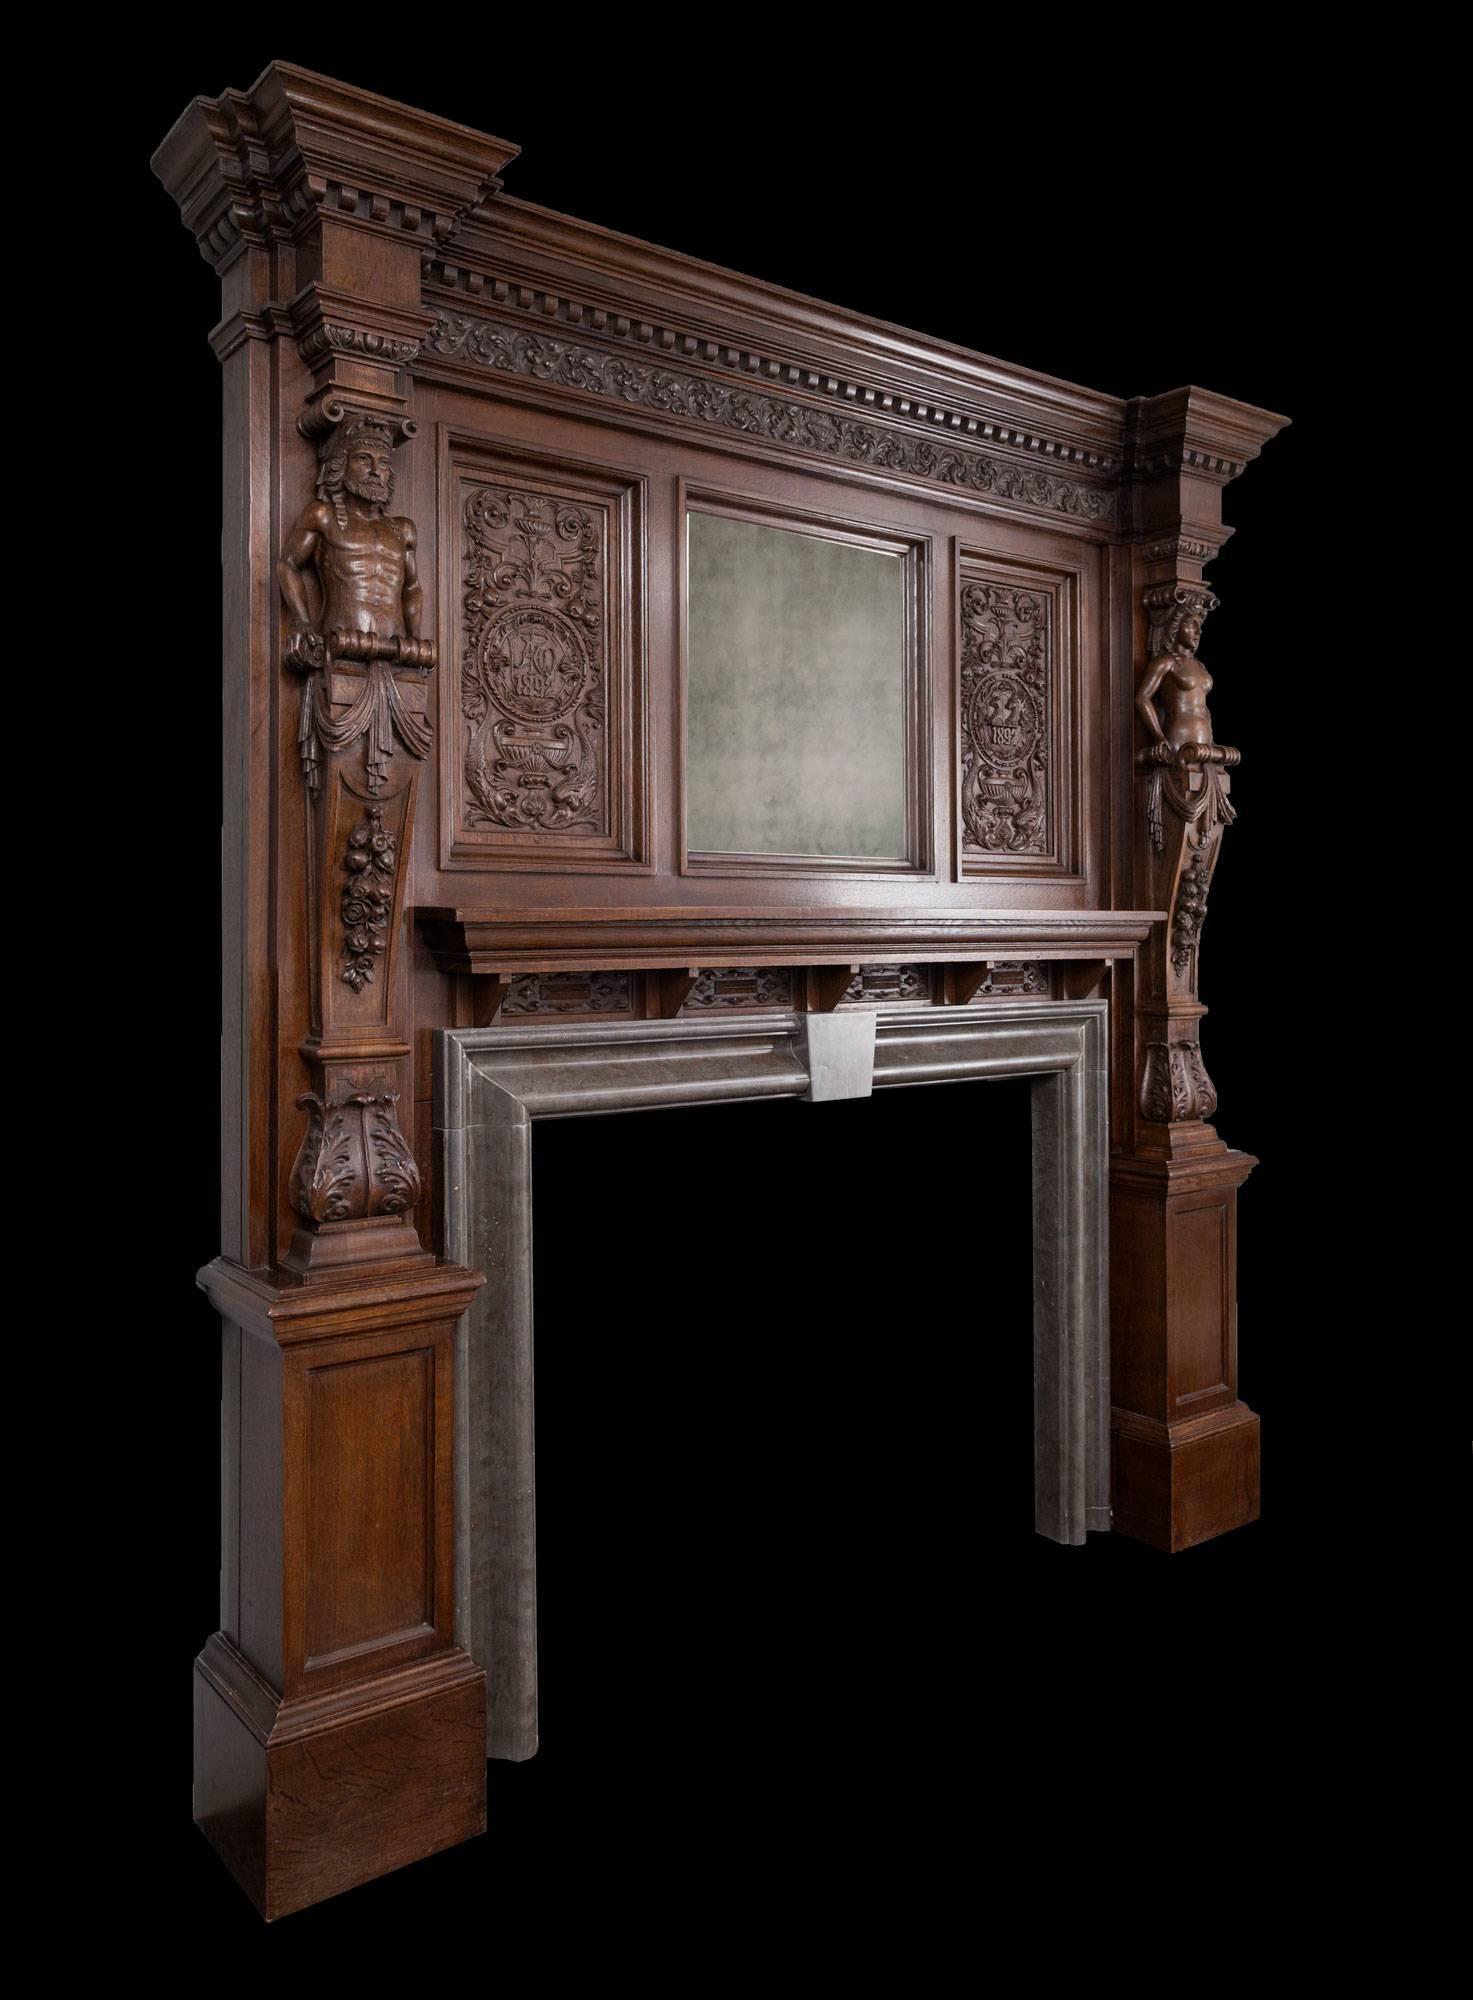 Magnificent antique English oak mantelpiece of exceptional quality. 

Large in scale and beautifully carved from oak in the Elizabethan Renaissance Revival style. A centre mirror is flanked by two exquisitely carved panels with the date of